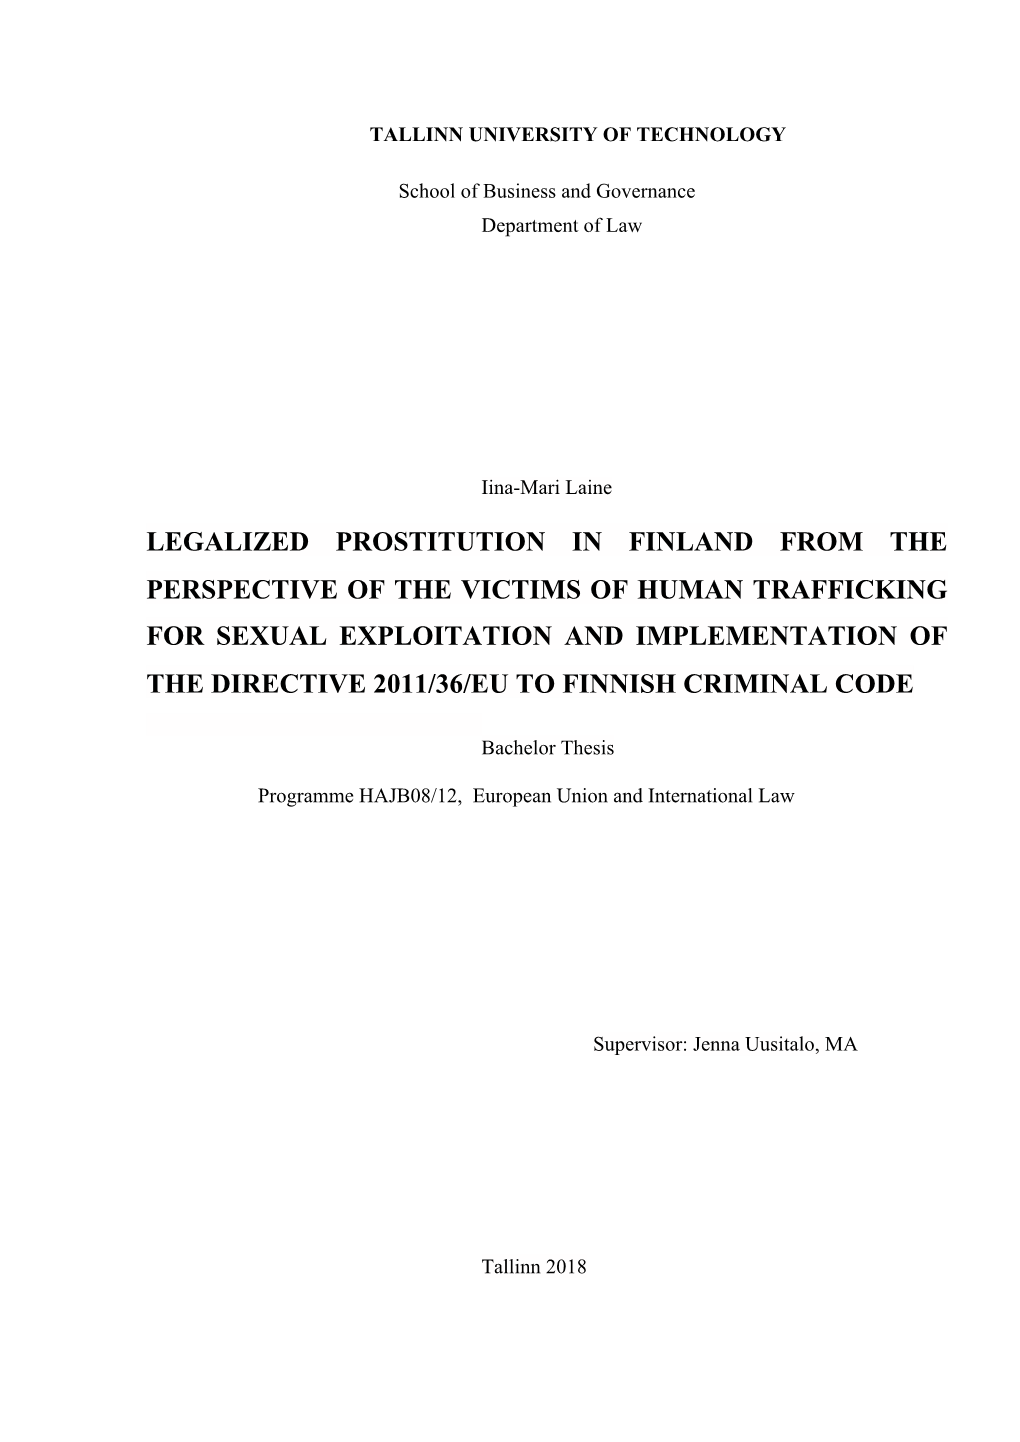 Legalized Prostitution in Finland from the Perspective of the Victims of Human Trafficking for Sexual Exploitation and Implement